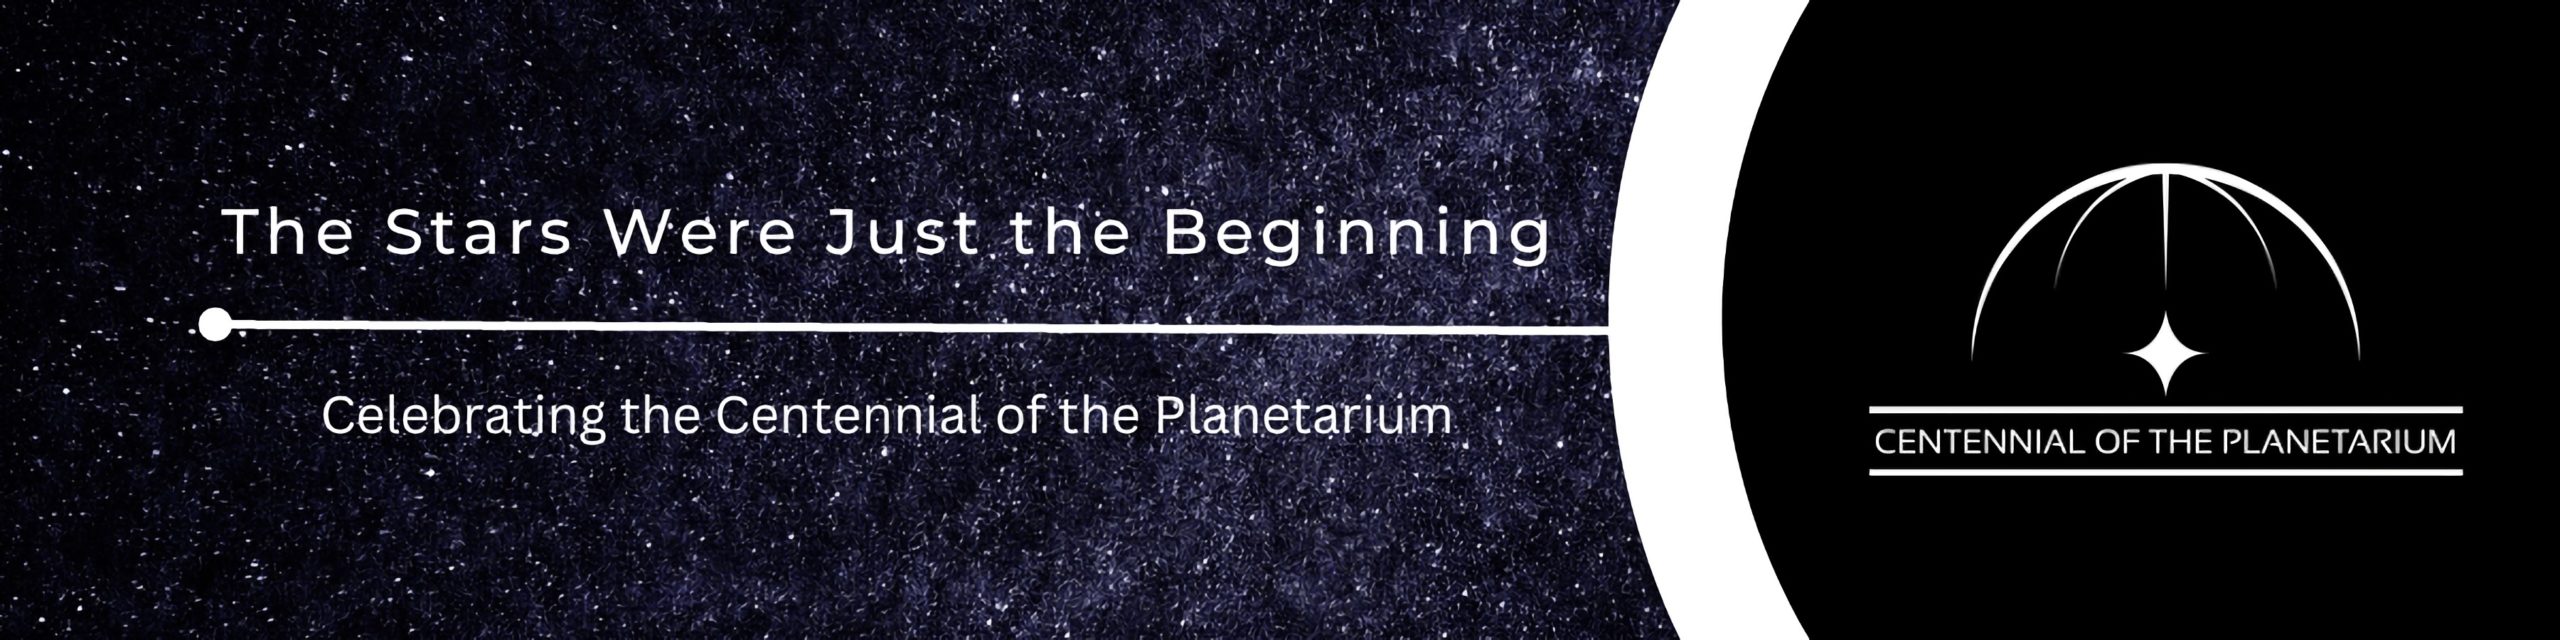 img news fulldome the-centennial-of-the-planetarium-celebration-officially-begins-today